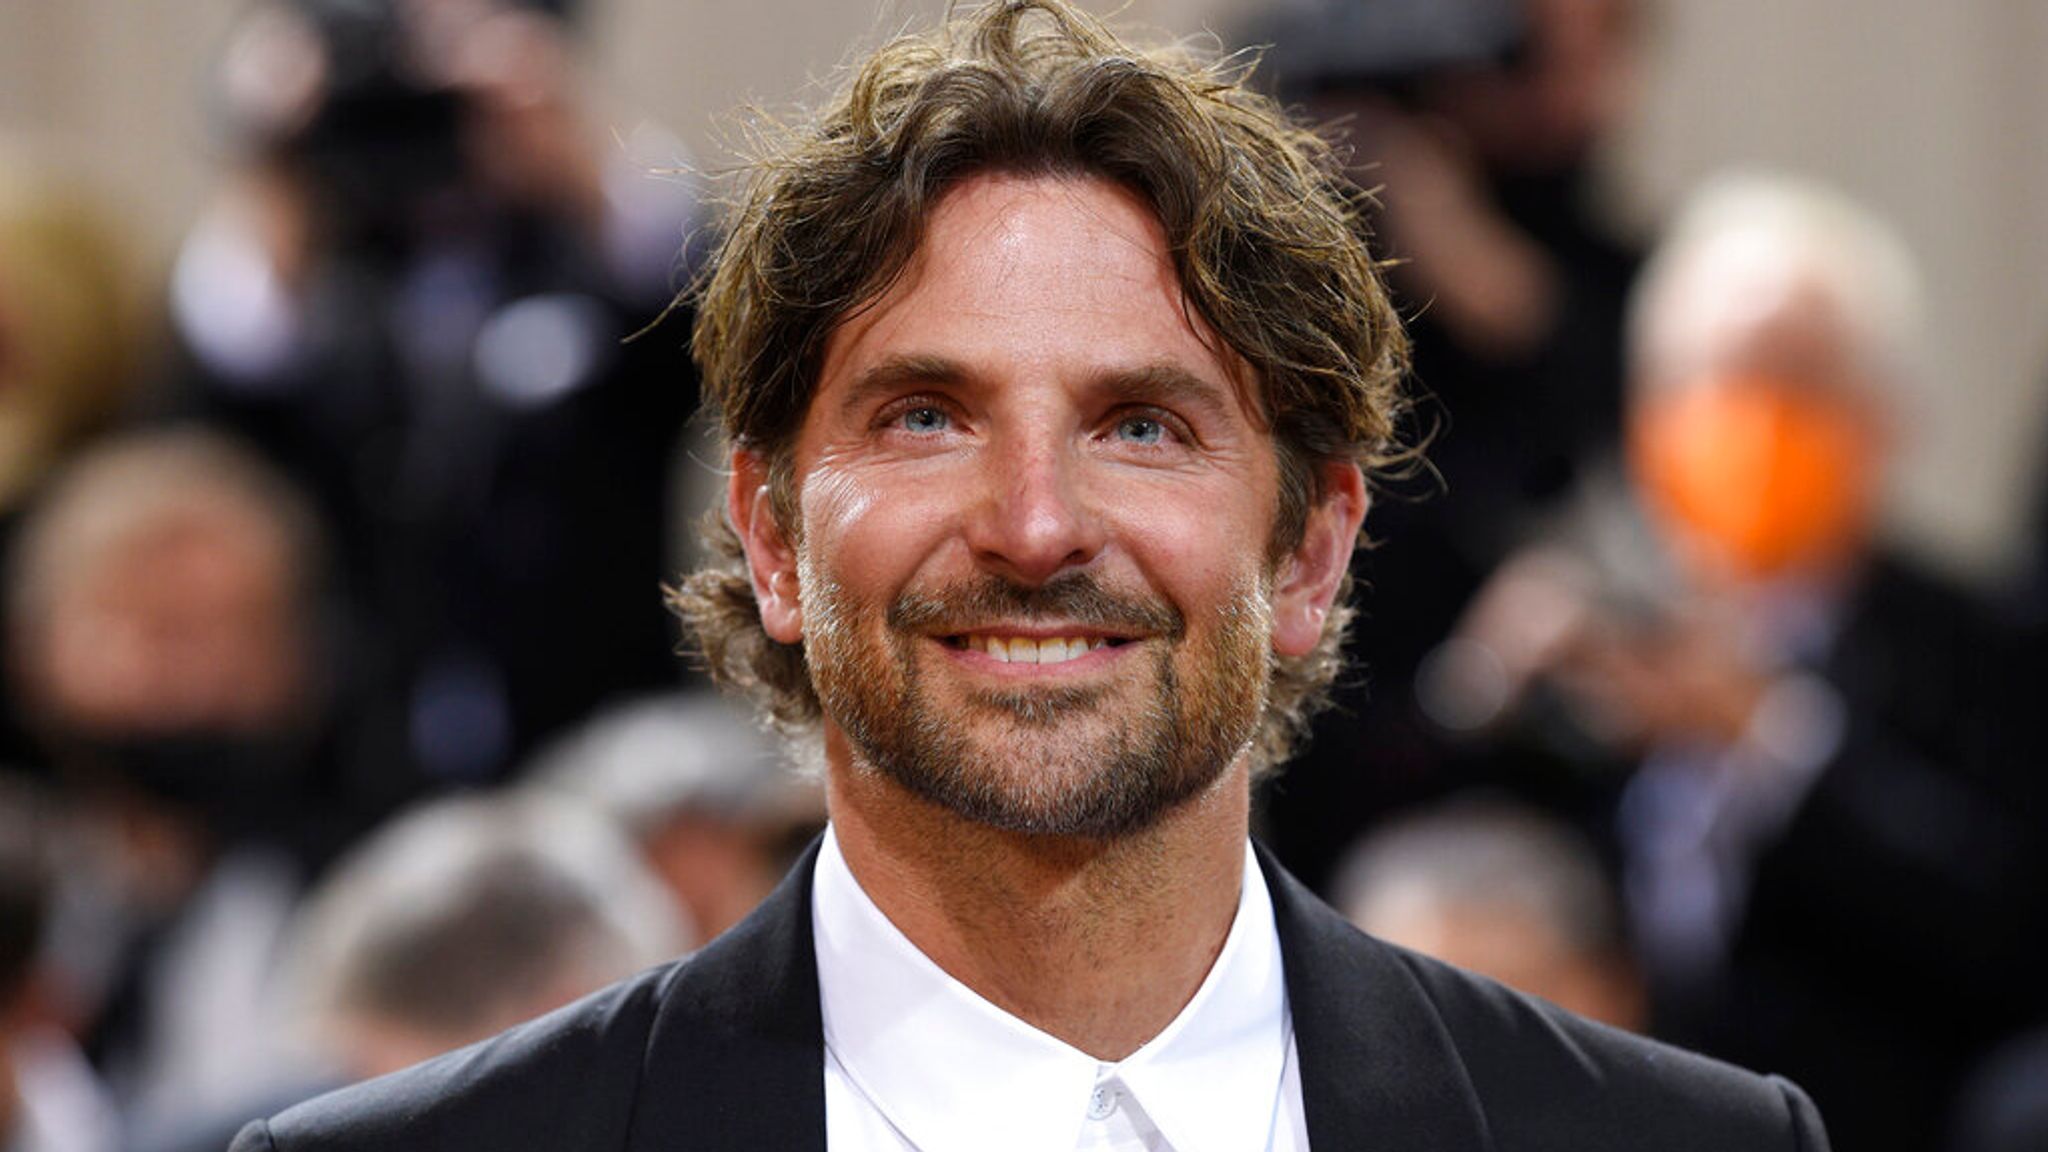 Bradley Cooper Recalls Time in His 20s When He Was 'So Lost' and